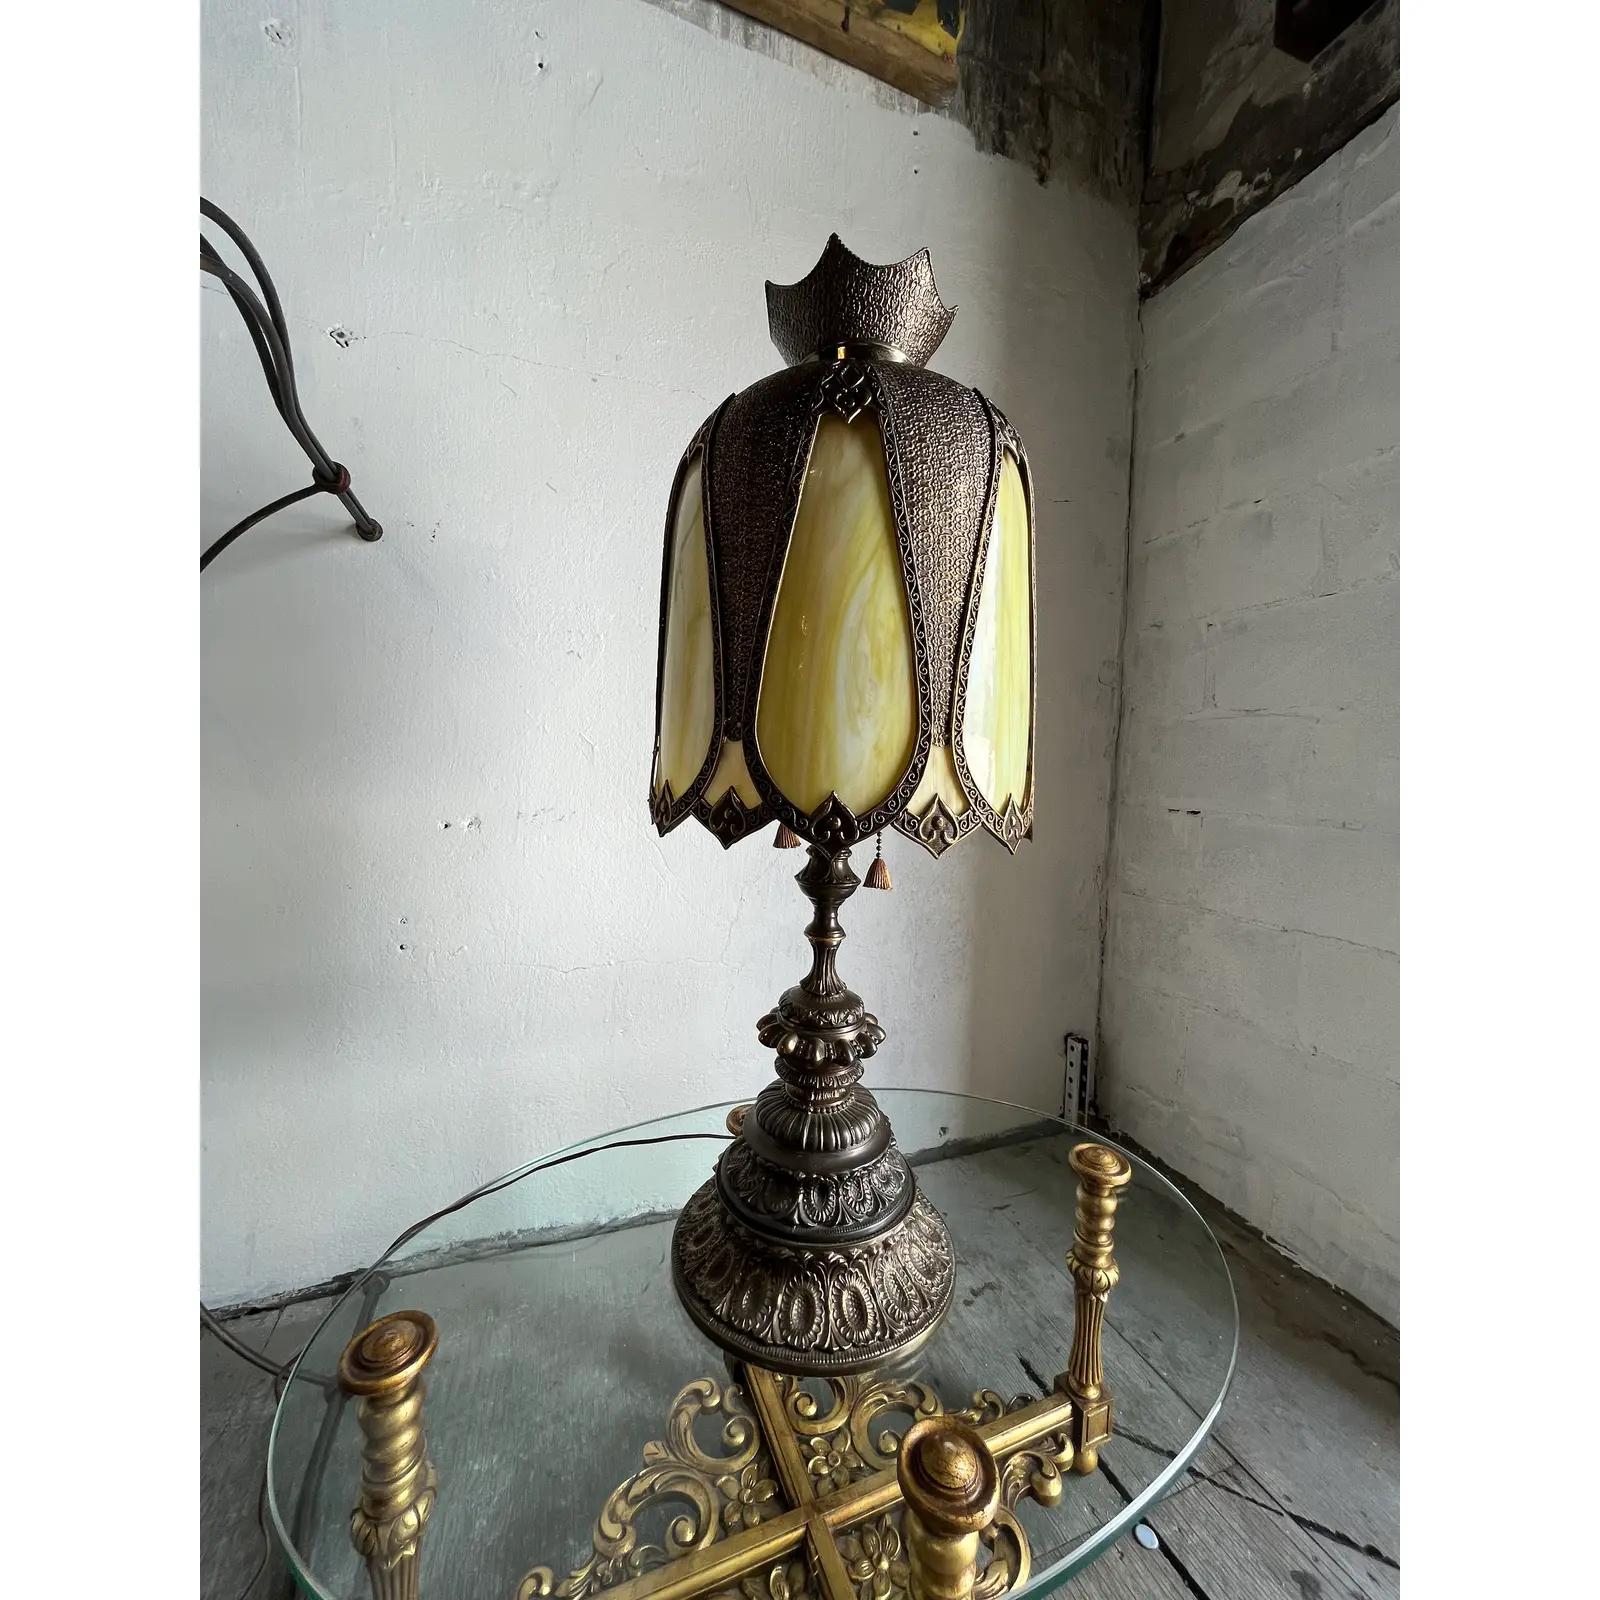 Slag glass and bronze lamp. Great proportion and balance. Nicely patinated. 3 Bulb function on individual pull chains for controlled ambiance and color control of slag panes. Lamp Fashion MFG. Co.
Curbside to NYC/Philly $350